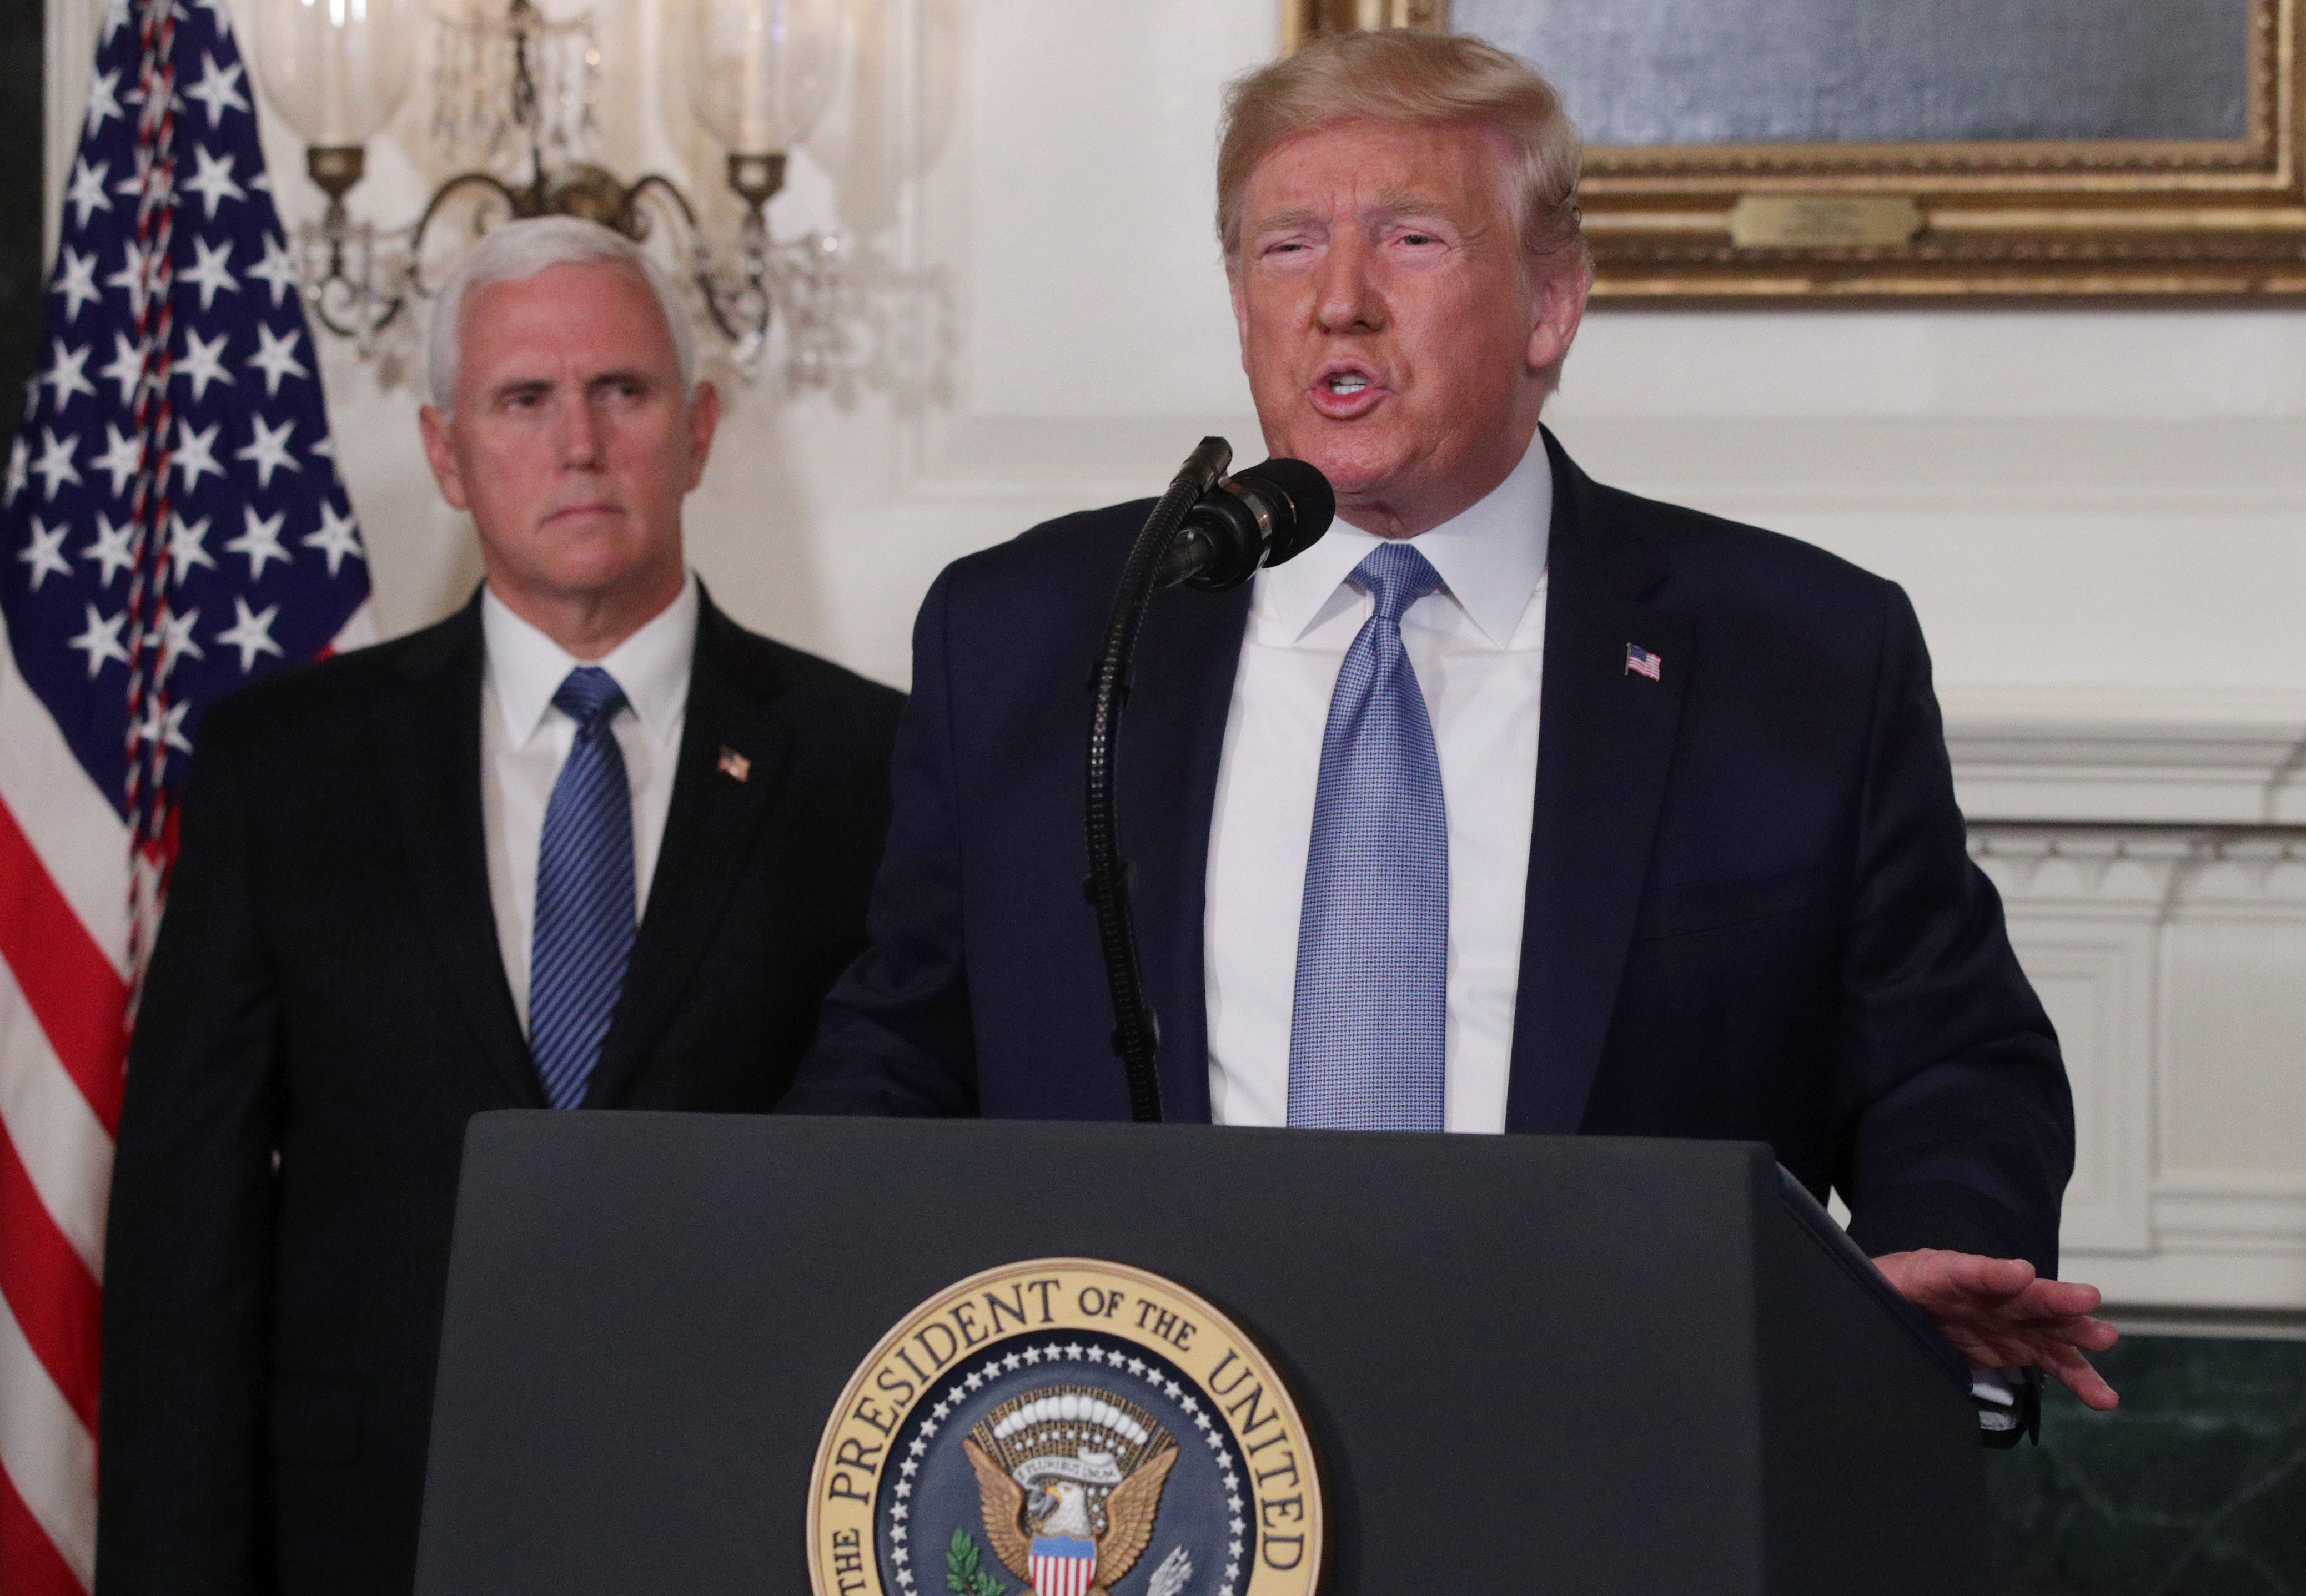 WASHINGTON, DC - AUGUST 05: U.S. President Donald Trump makes remarks in the Diplomatic Reception Room of the White House as U.S. Vice President Mike Pence looks on August 5, 2019 in Washington, DC. President Trump delivered remarks on the mass shootings in El Paso, Texas, and Dayton, Ohio, over the weekend. (Photo by Alex Wong/Getty Images)